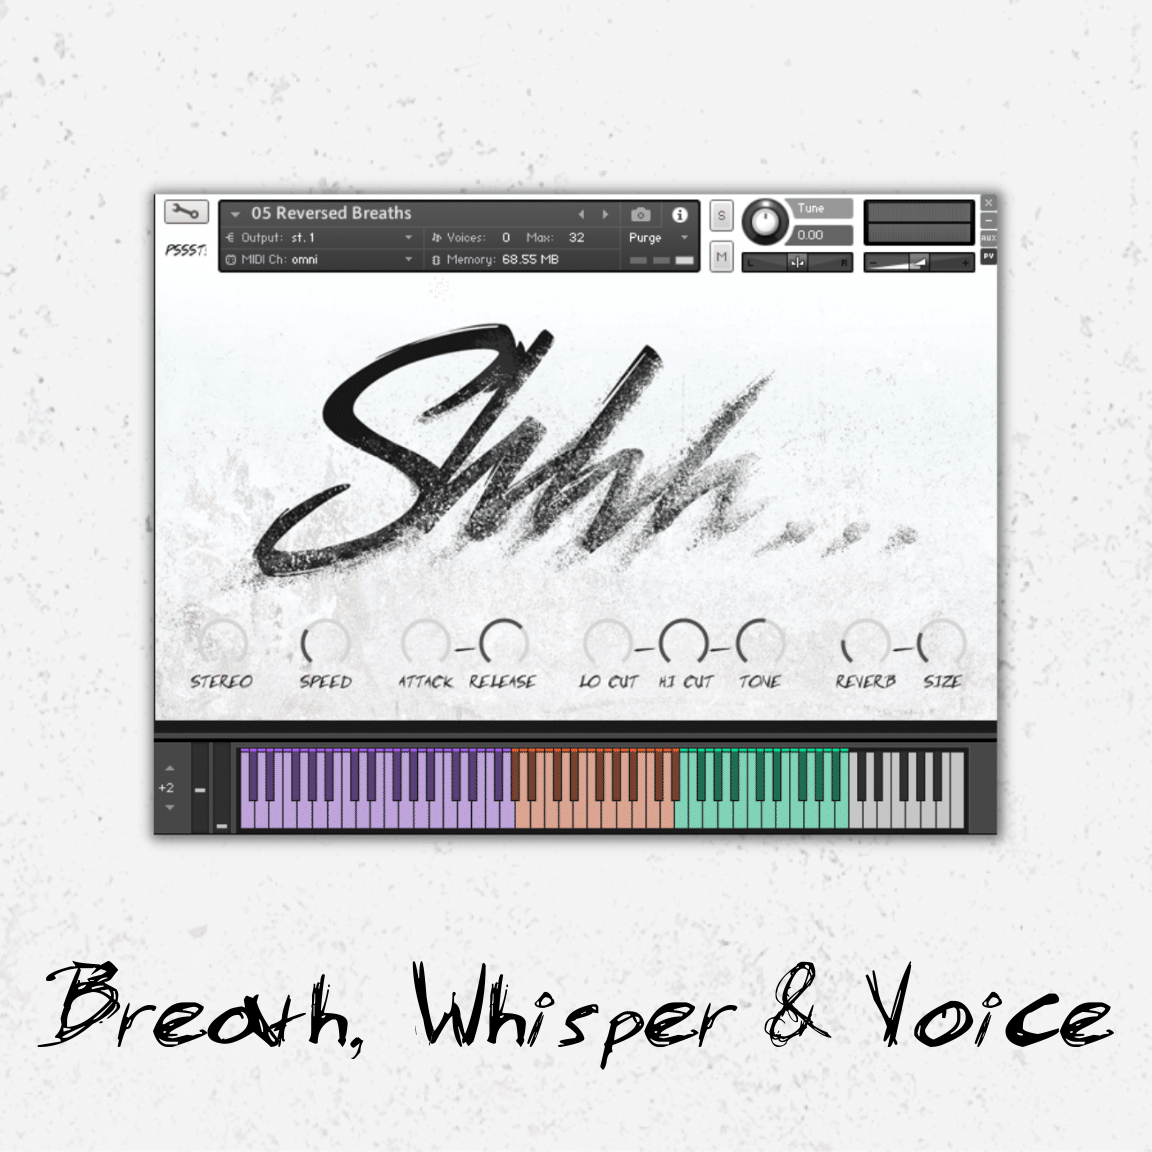 60% off “Shhh… Breath, Whisper & Voice” by Pssst! Instruments